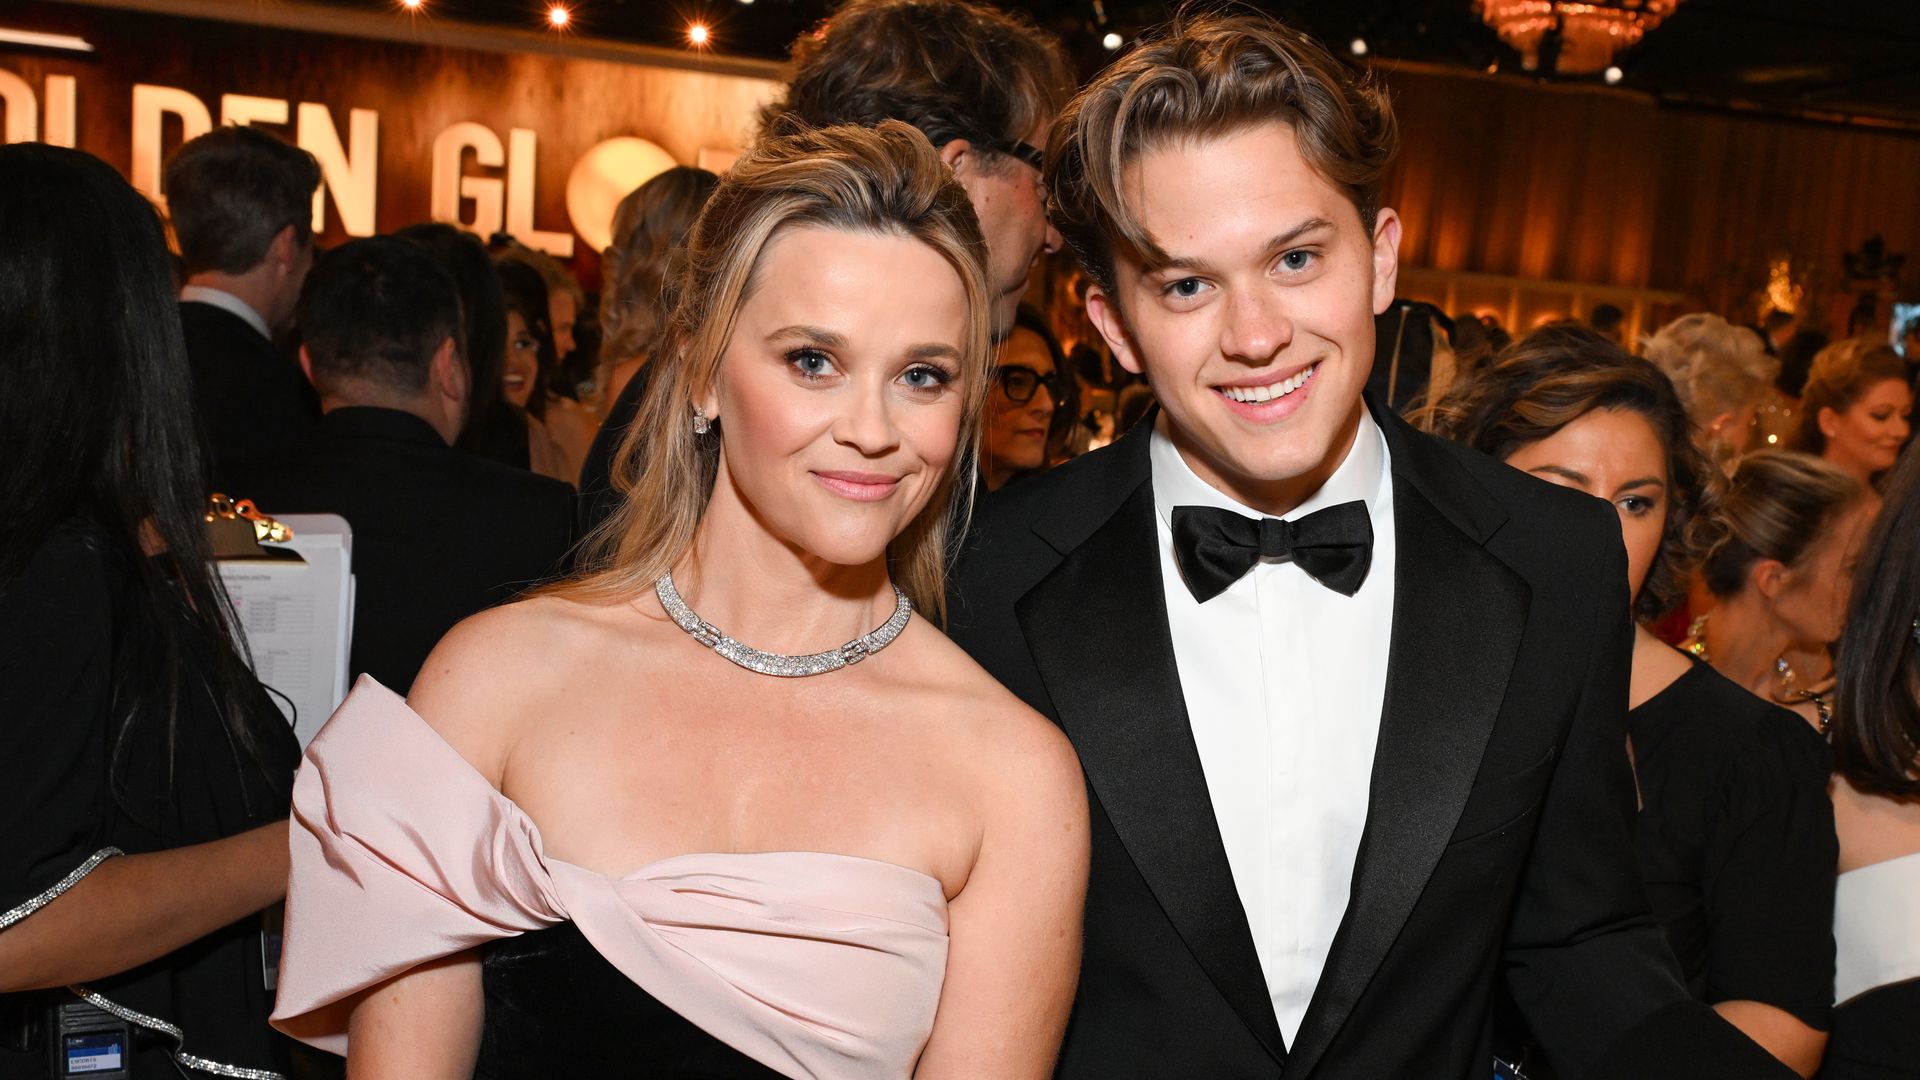 Reese Witherspoon with her son Deacon